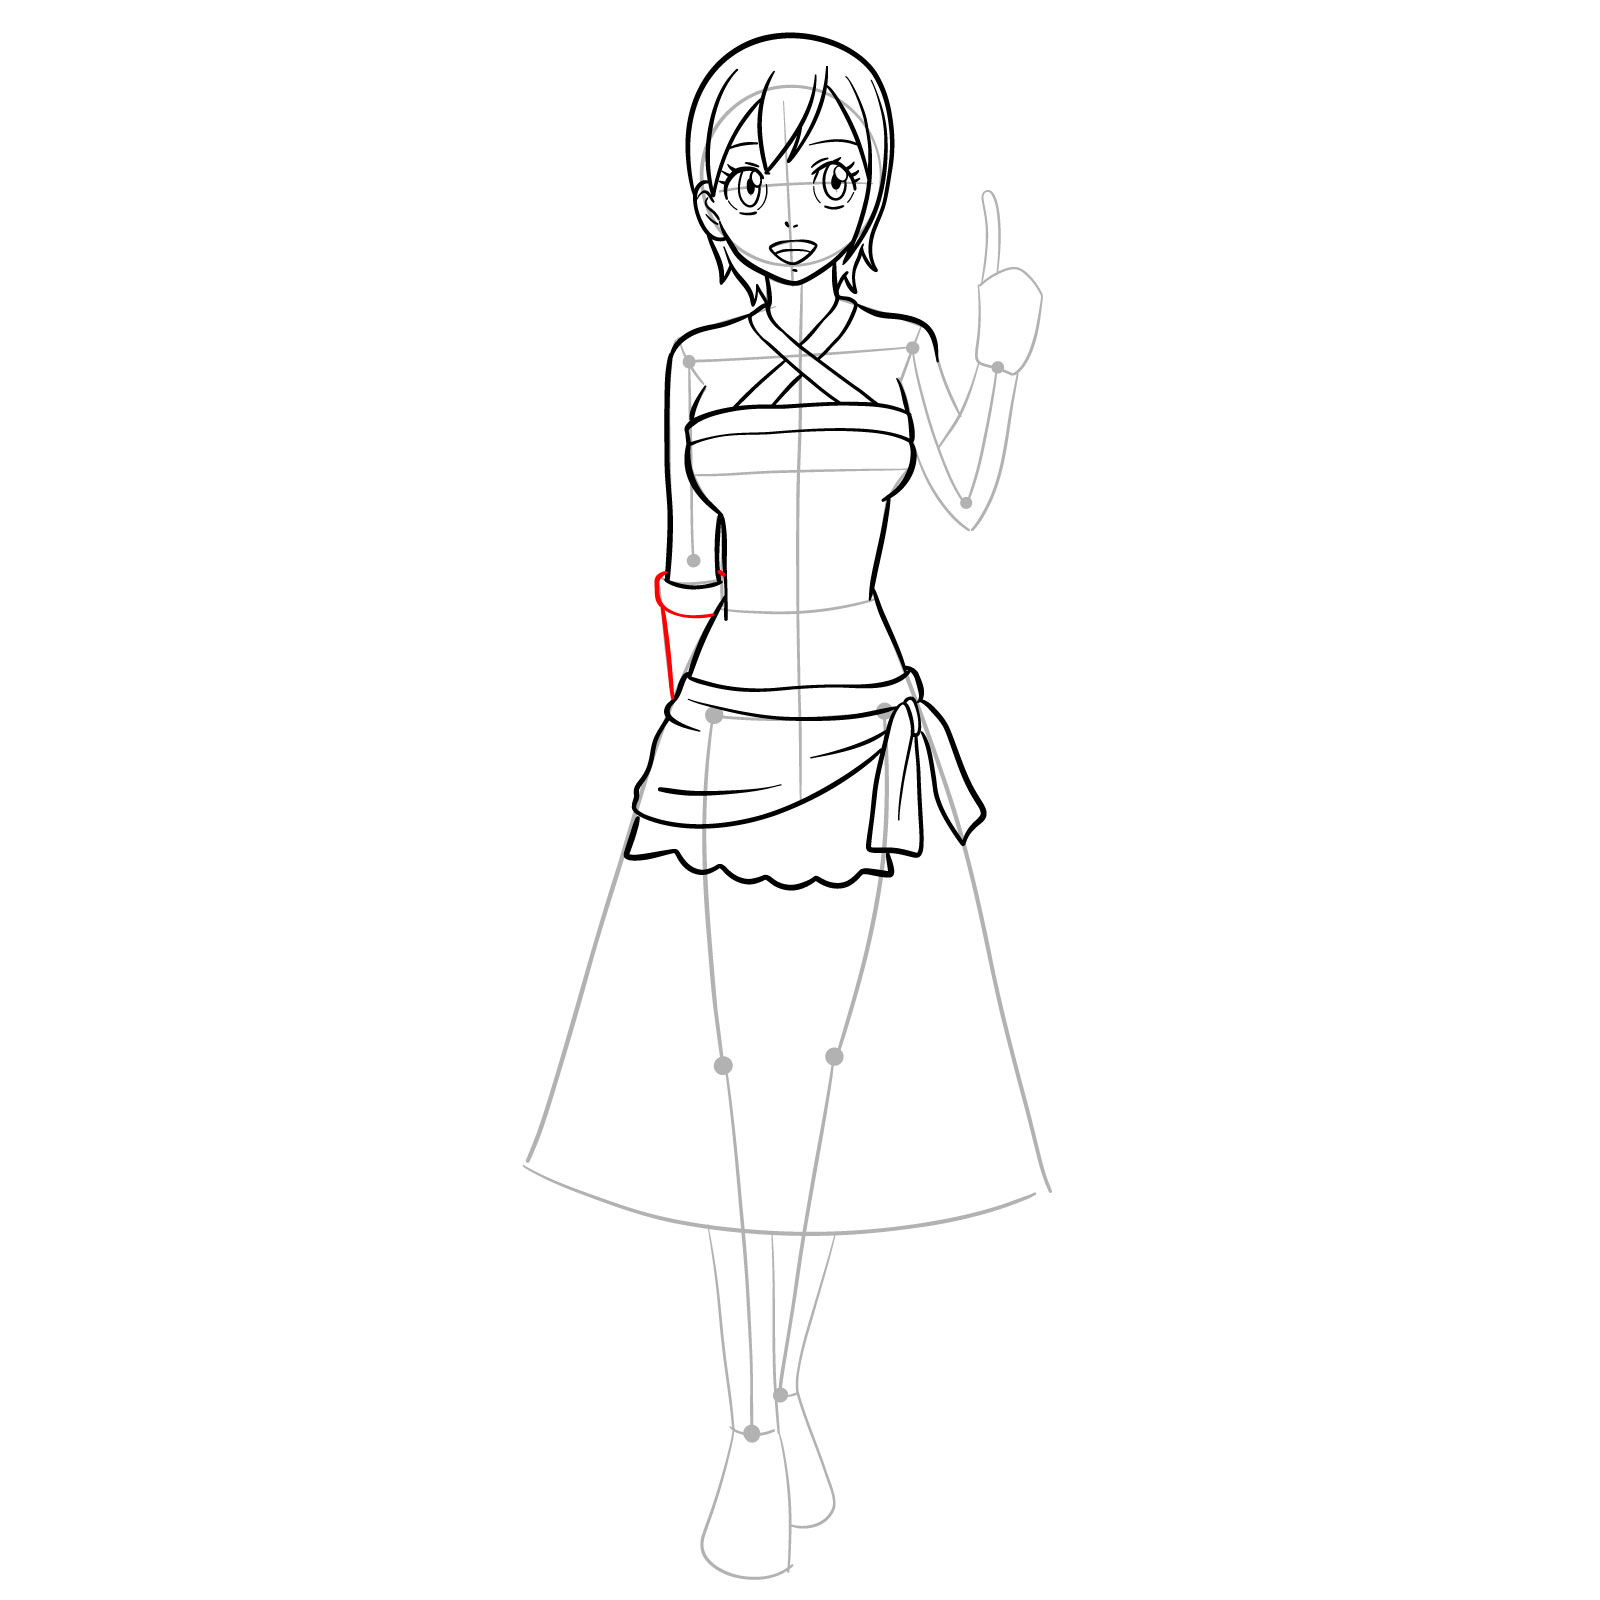 How to draw Lisanna Strauss from Fairy Tail - step 22